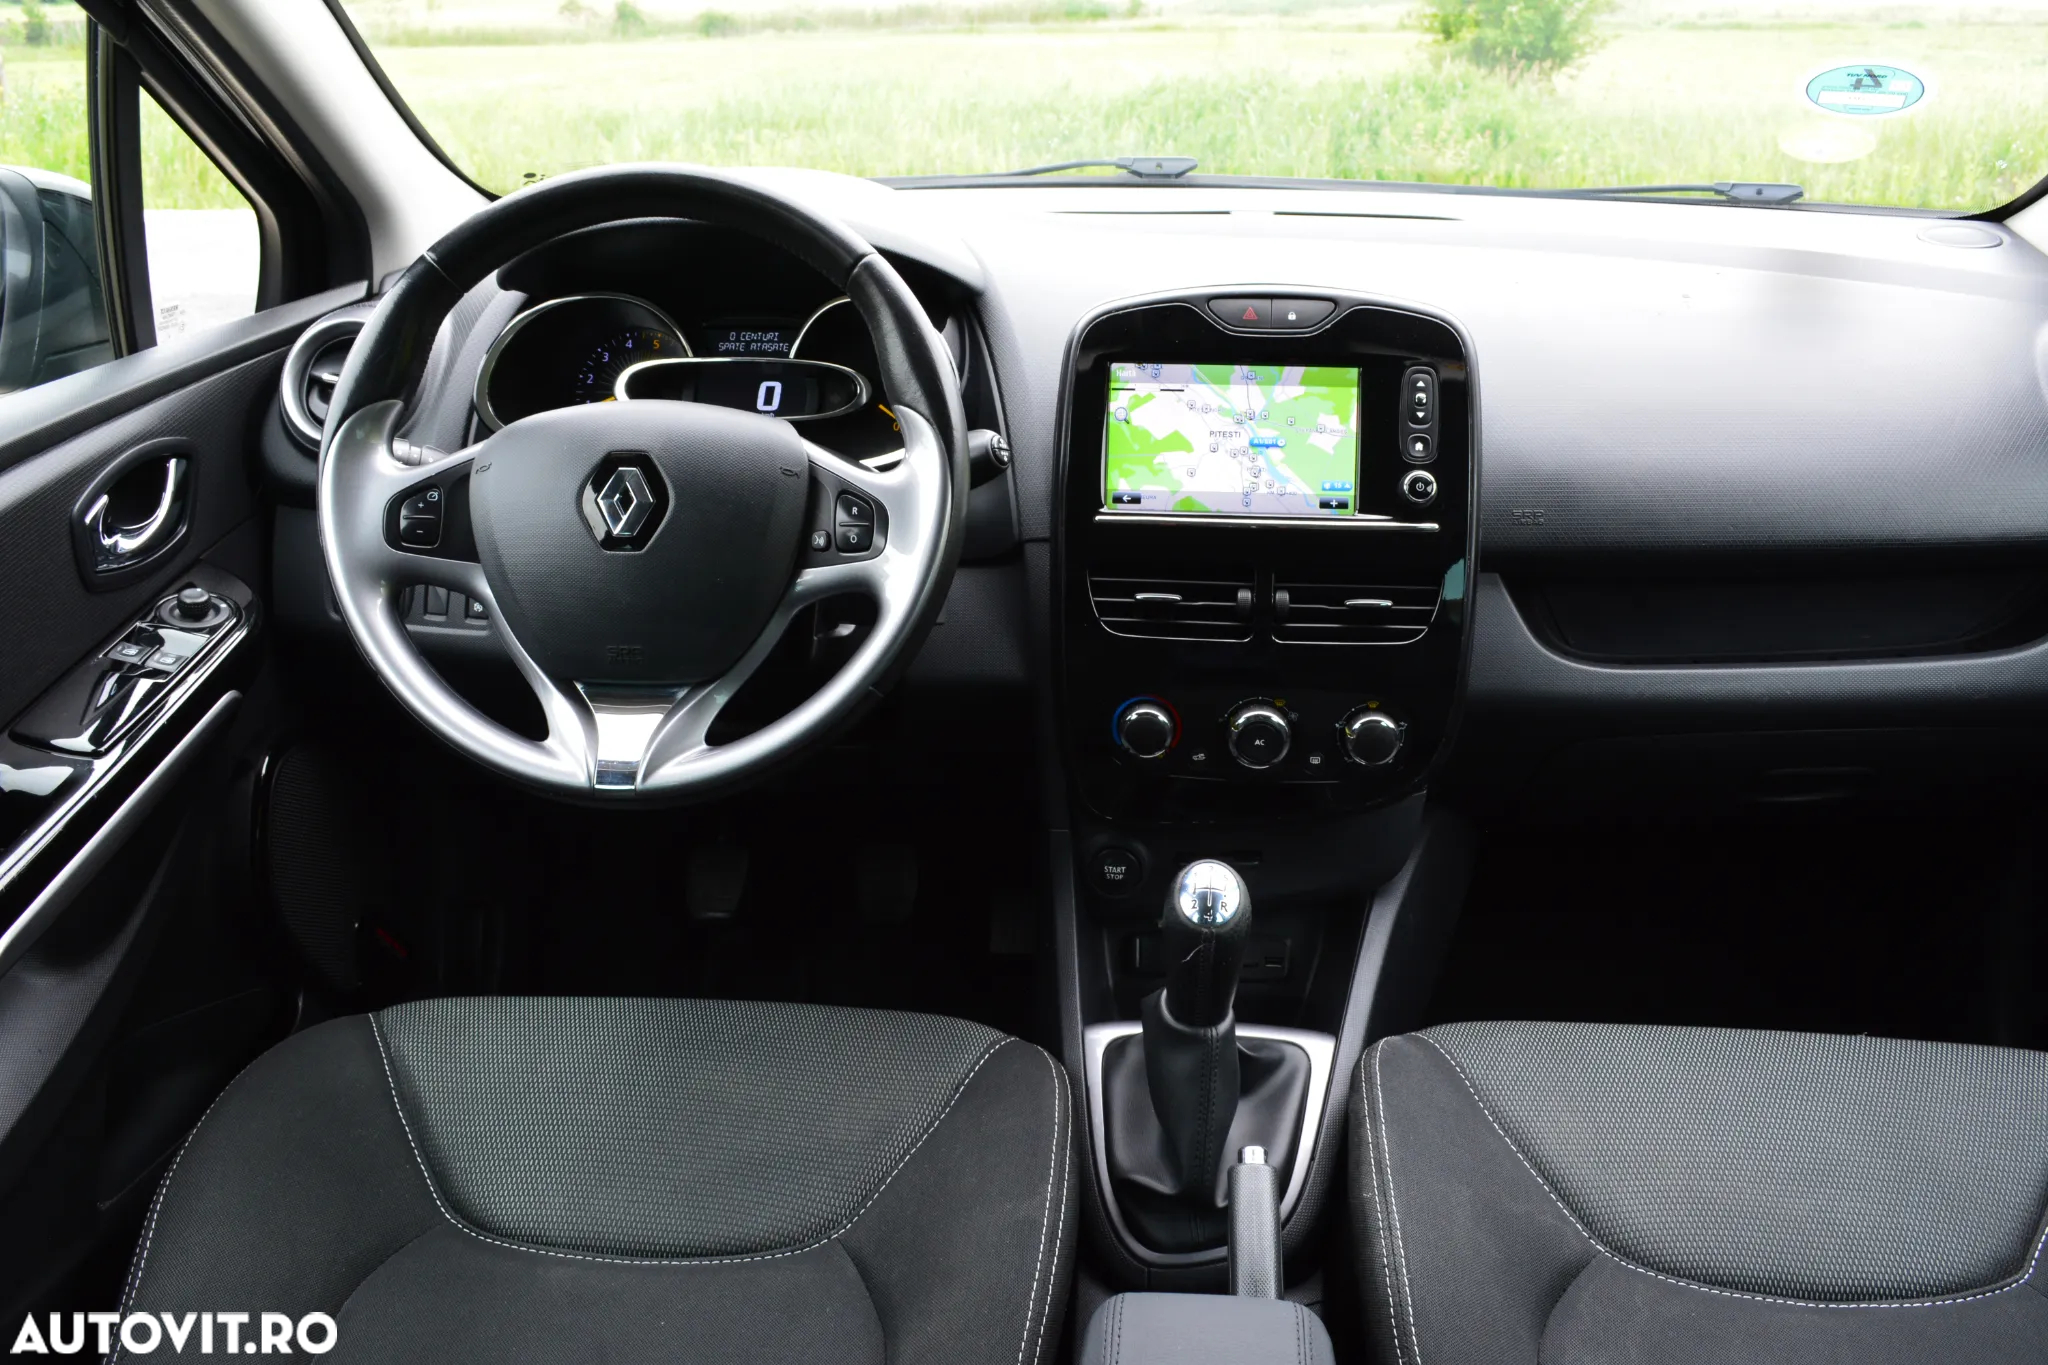 Renault Clio (Energy) dCi 90 Start & Stop LIMITED - 15